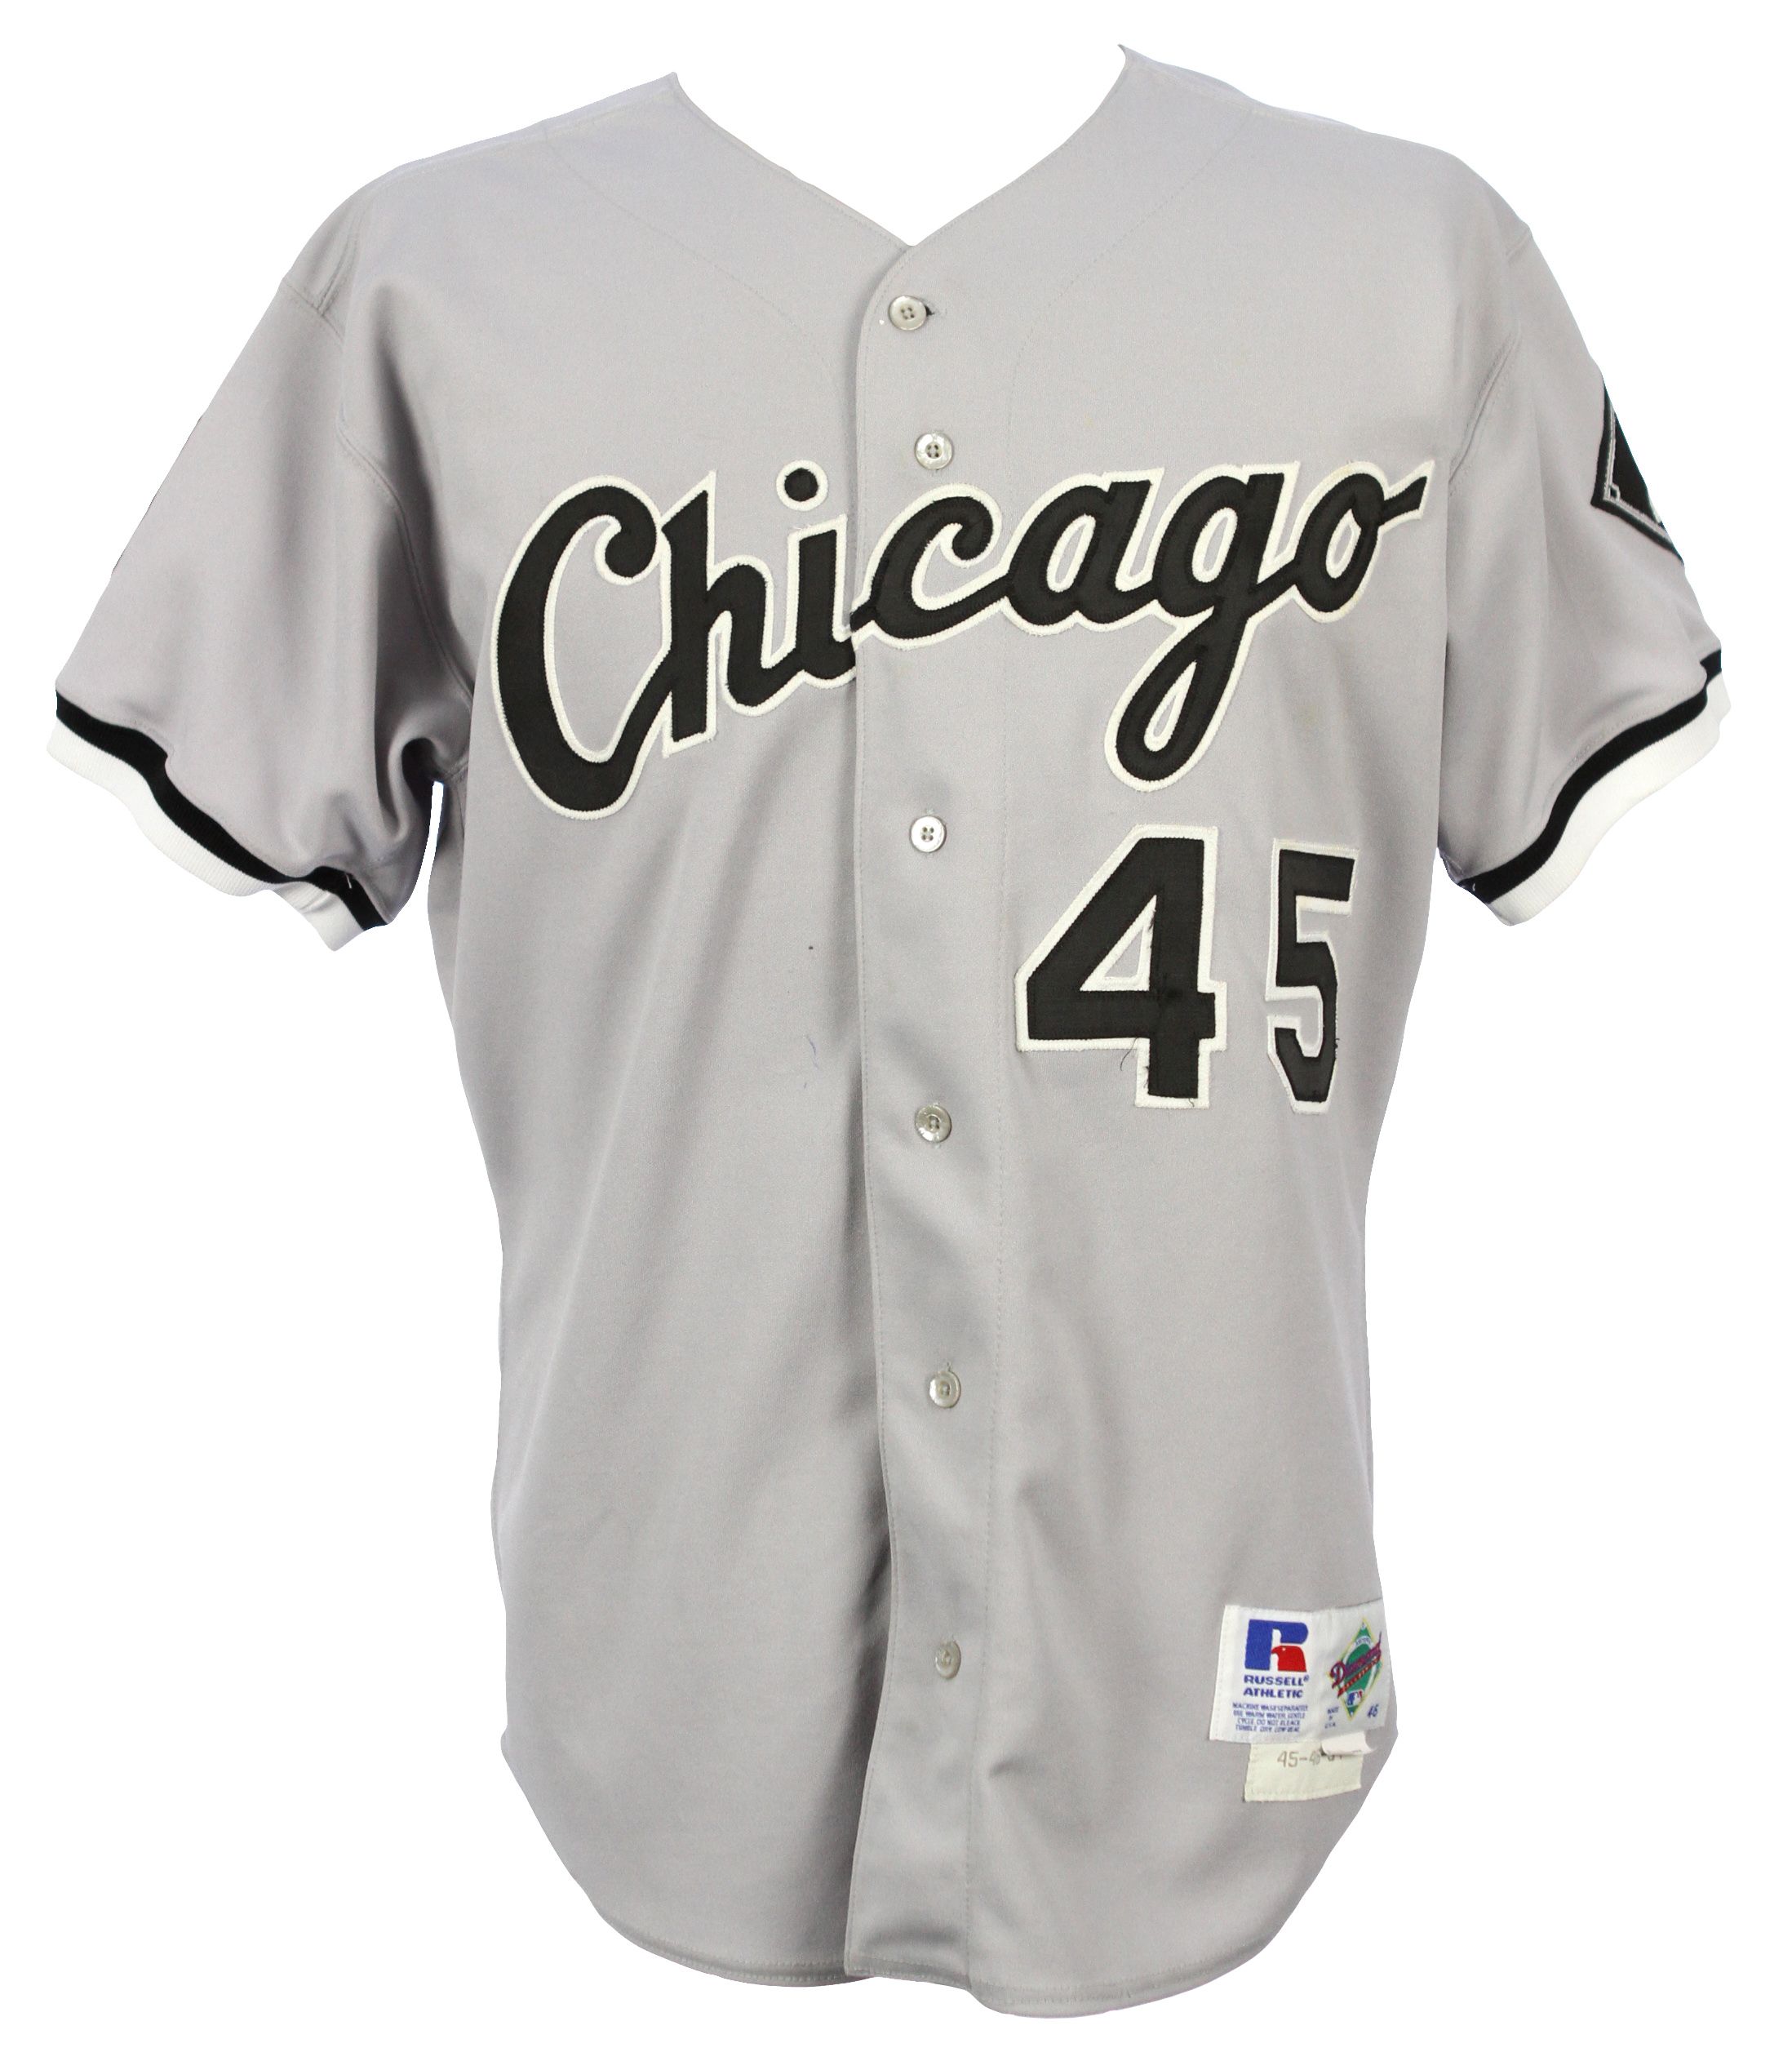 spring training white sox jersey